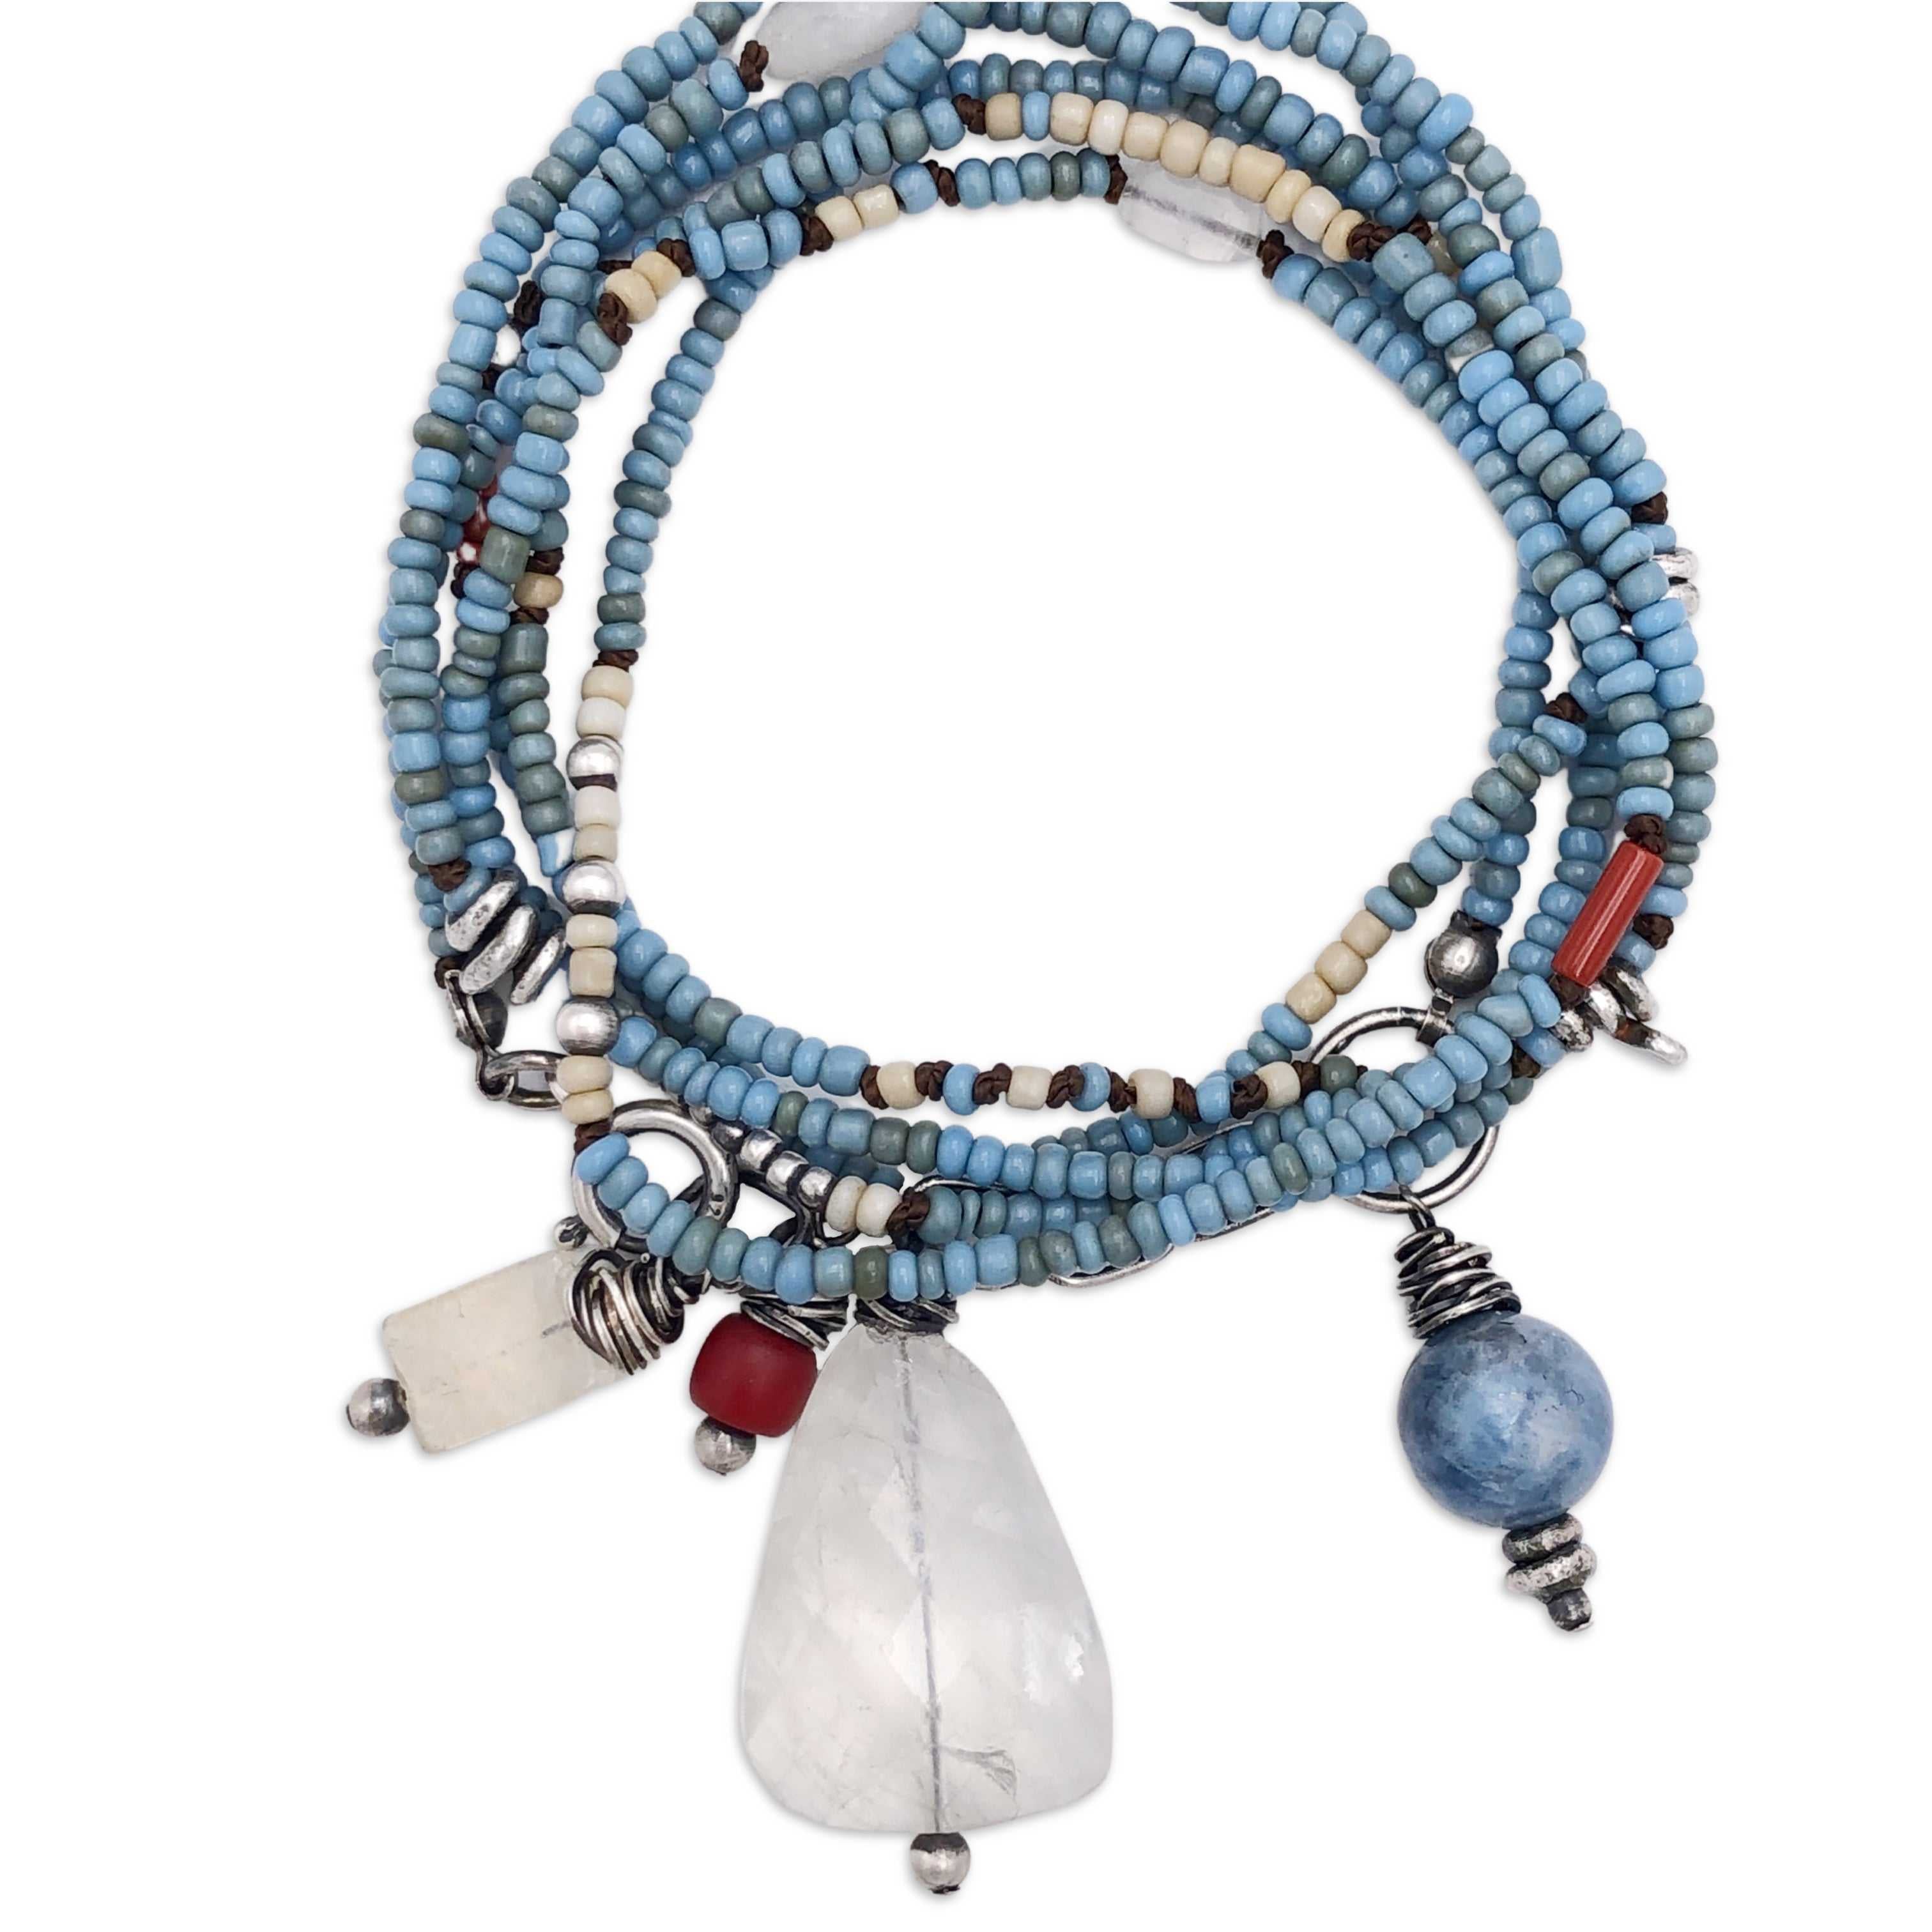 Blue African glass bead Necklet